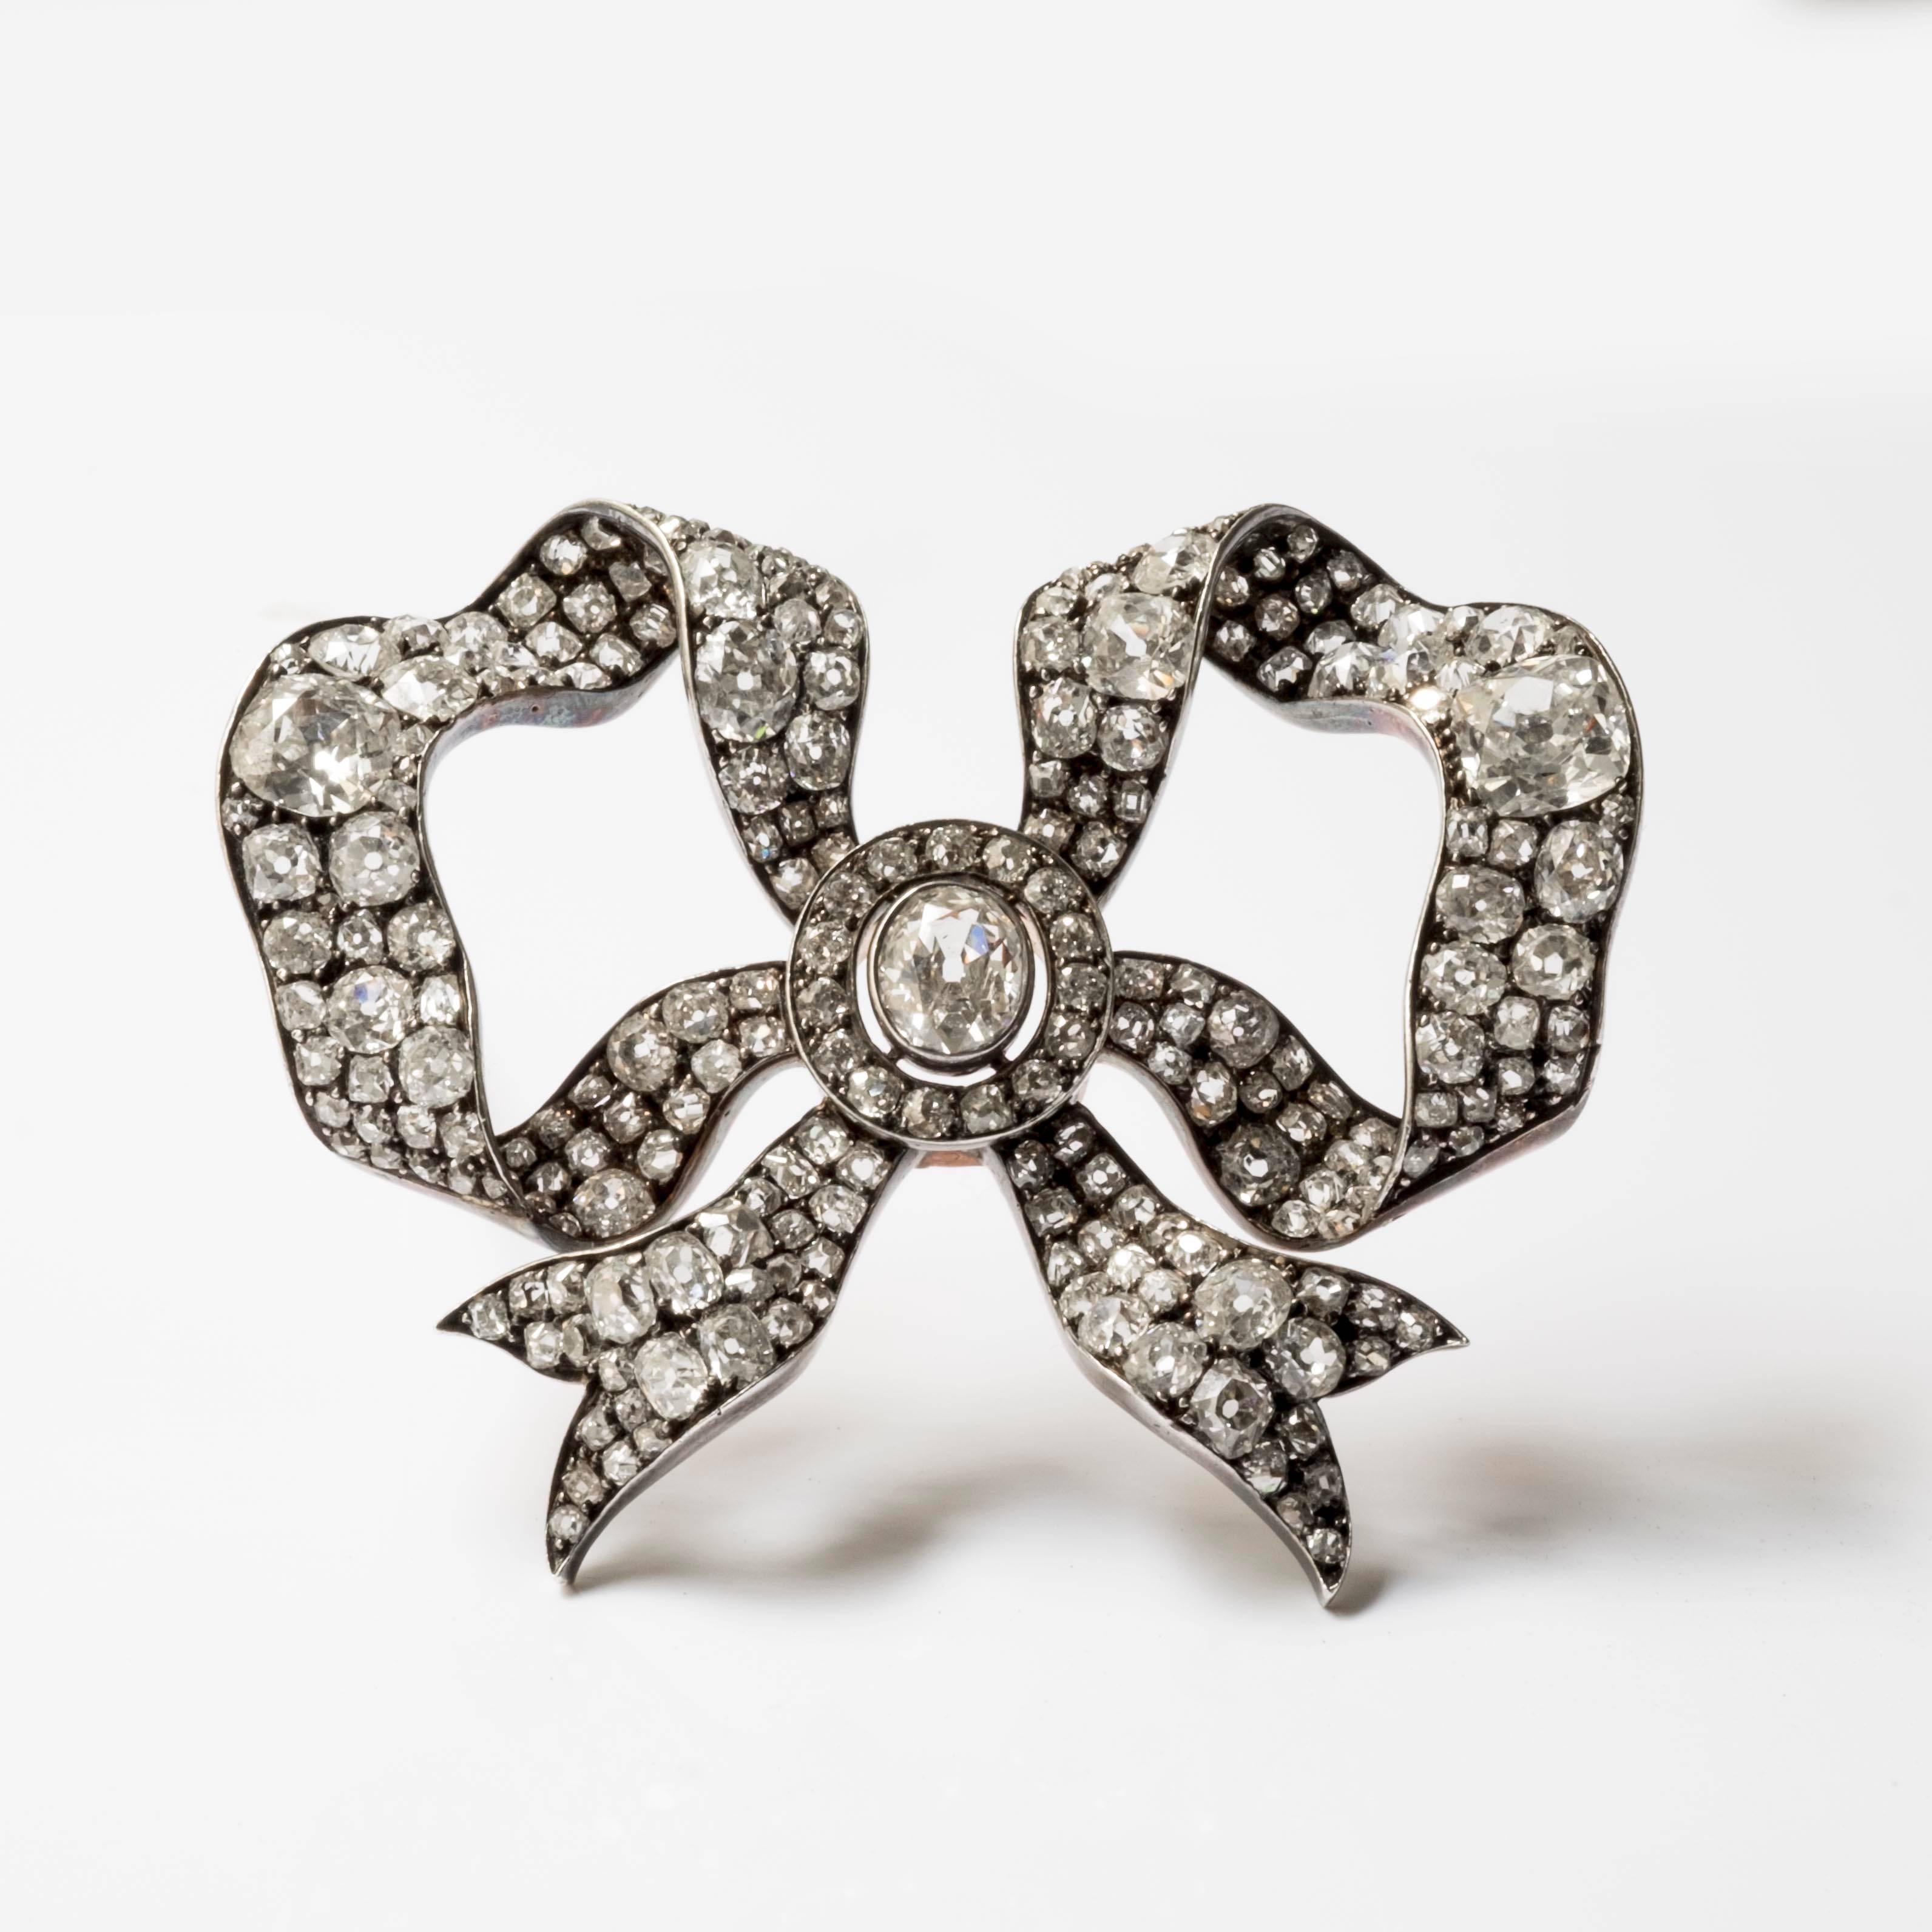 An antique bow-shaped brooch composed of gold, silver and old cut diamonds set in grains. This desirable and dainty brooch was manufactured in the 1880s. The 3 main stones weigh approximately 2 to 3 carats. These jewels were made for the french